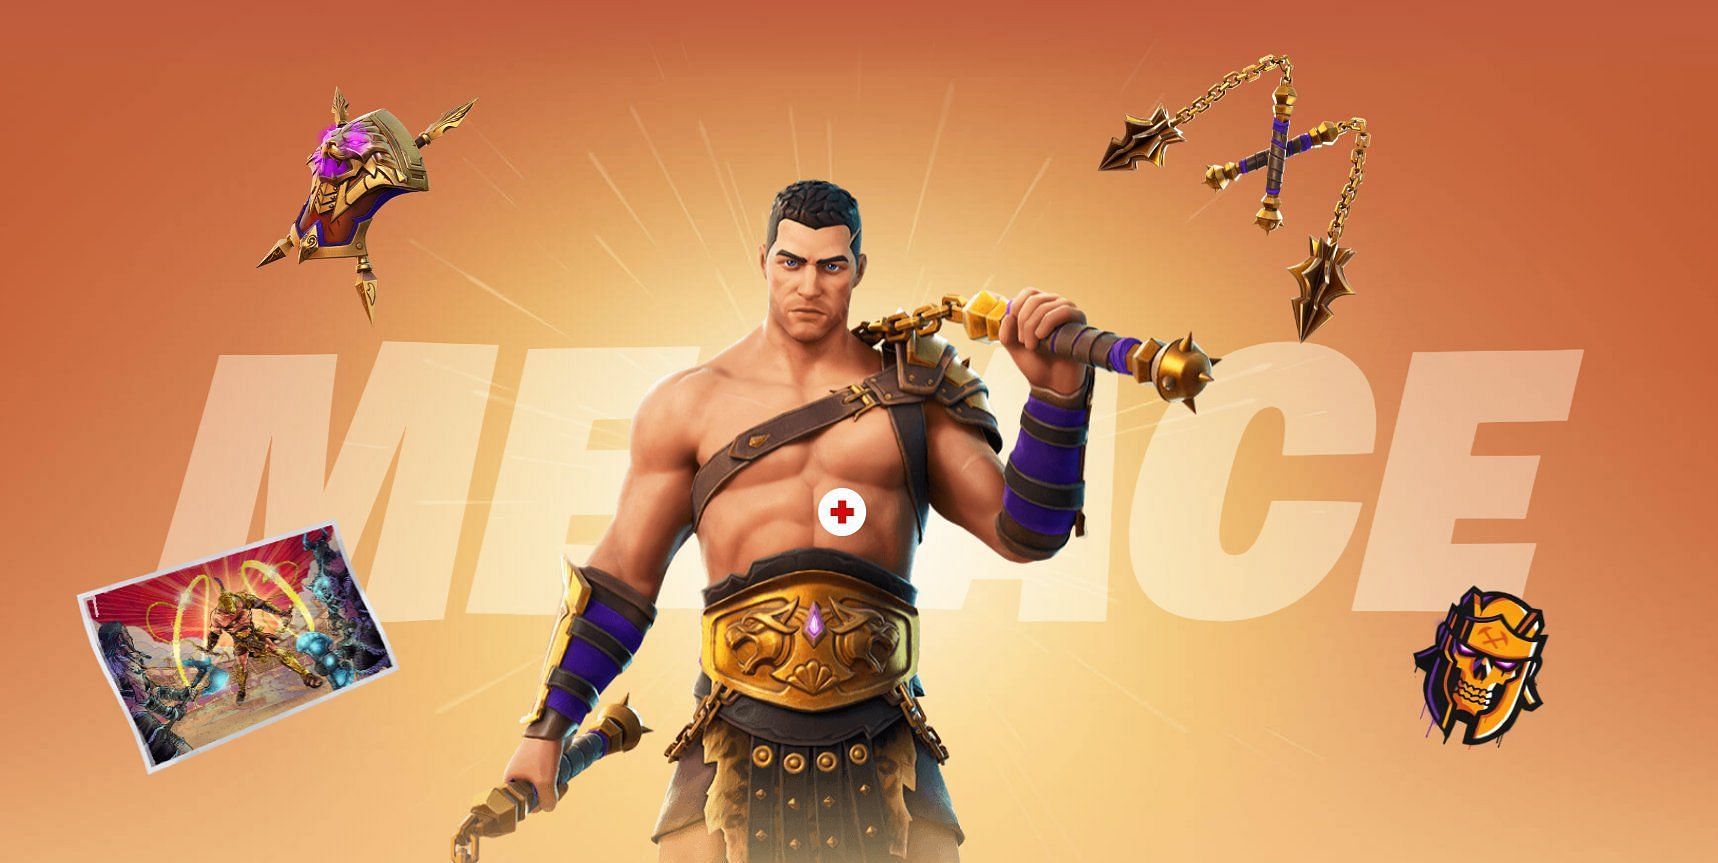 A look at the Menace skin in Fortnite (Image via Epic Games)